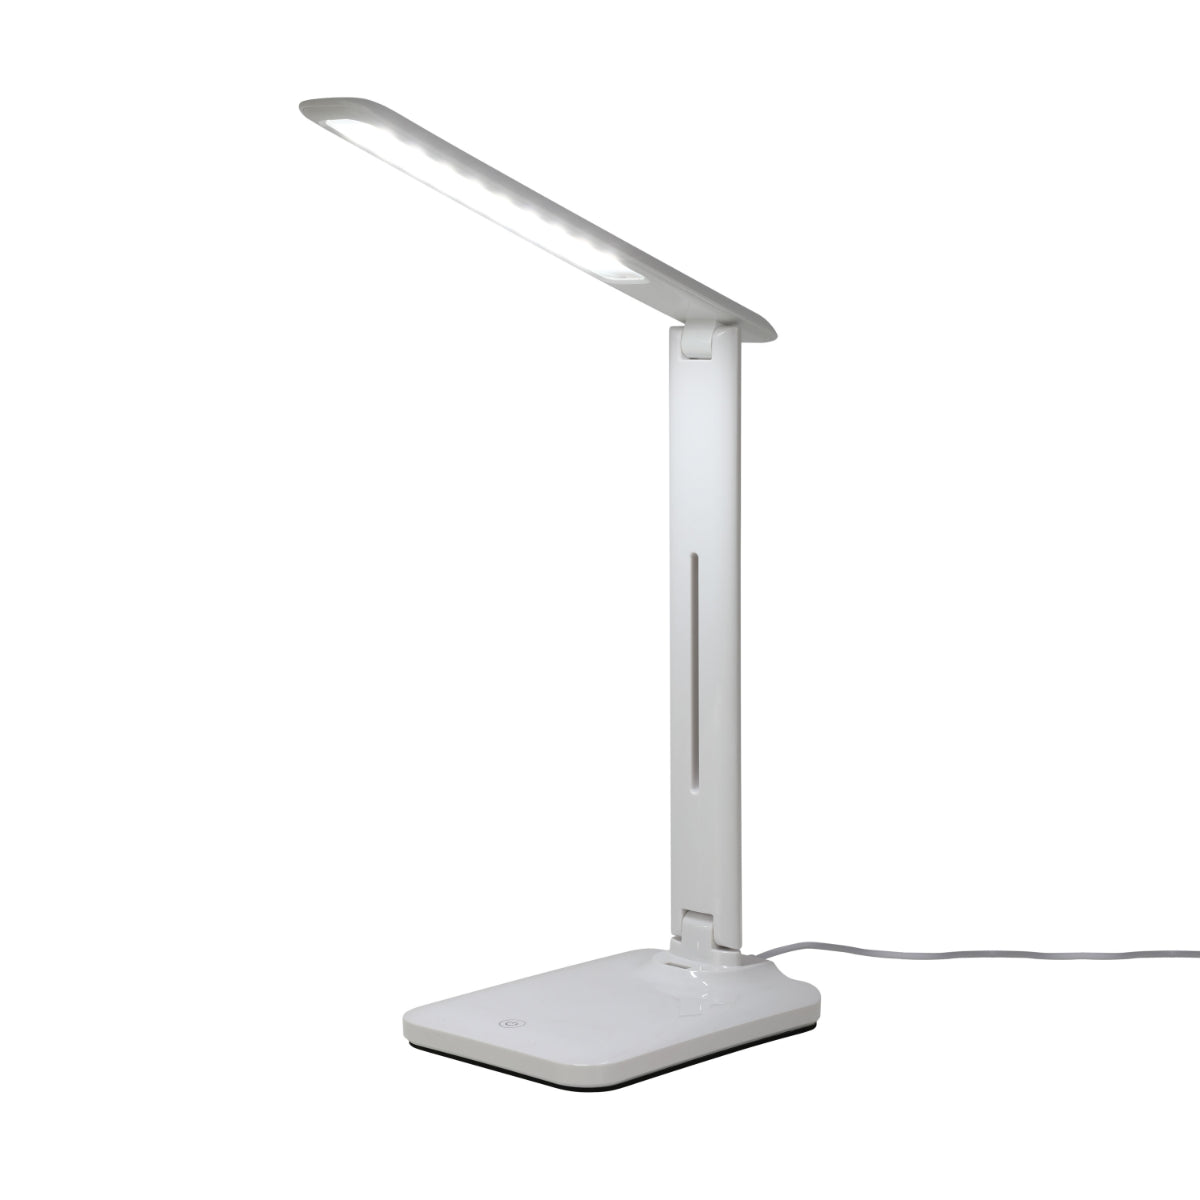 Main image of Foldable LED Desk Lamp with USB Phone Charging Feature 130-03763